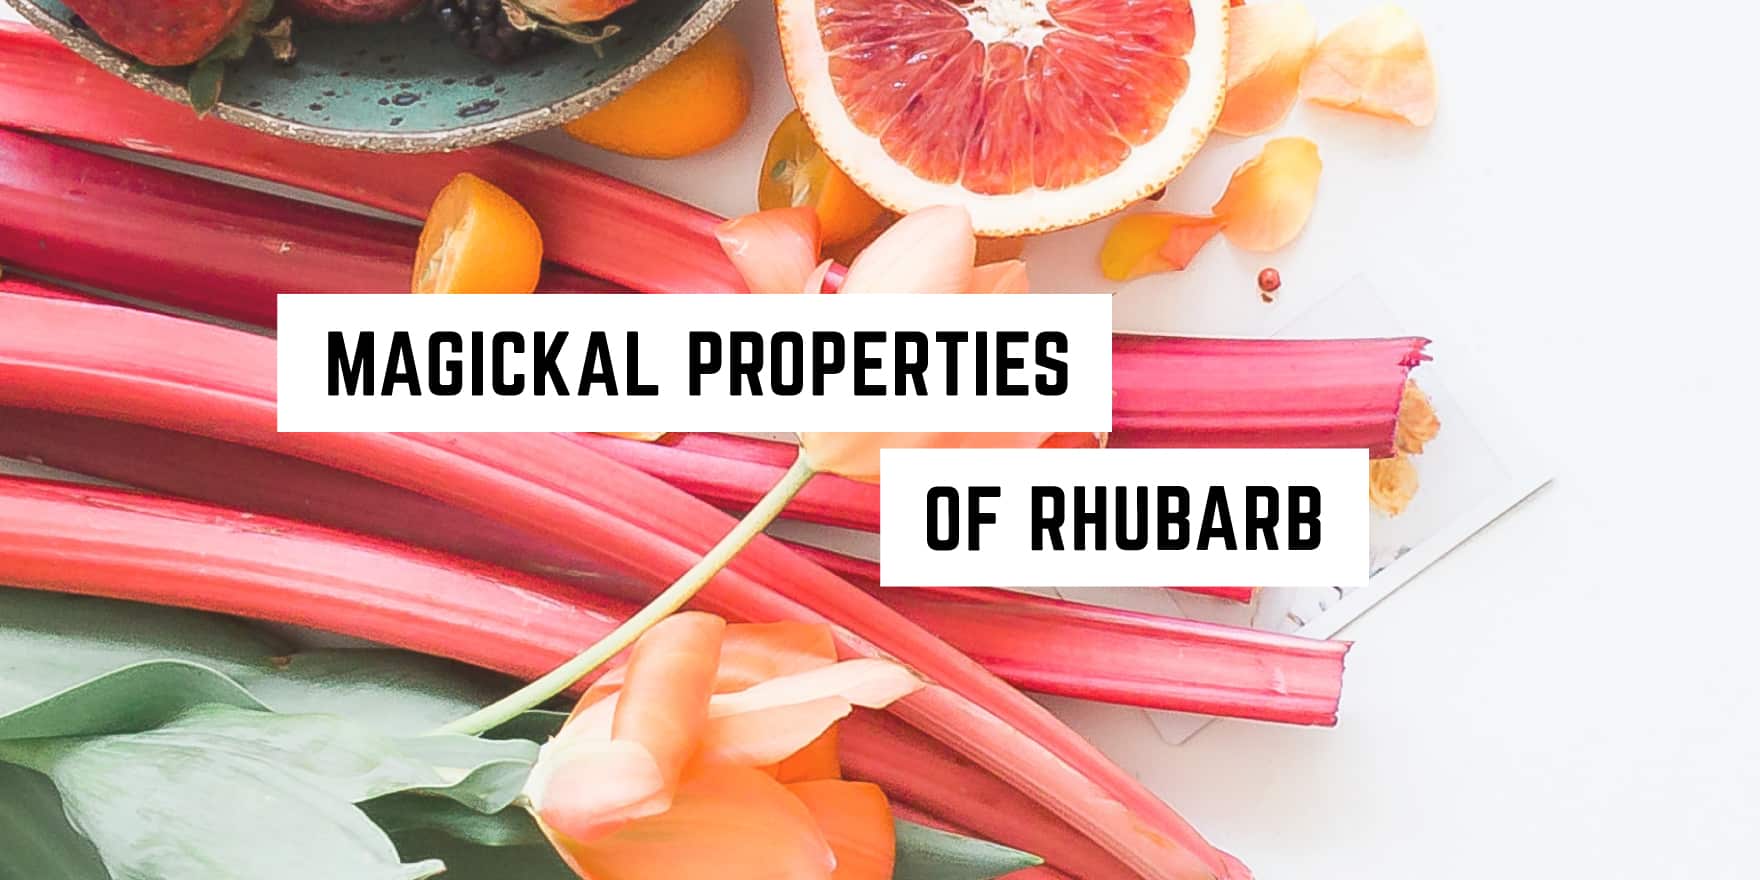 An array of fresh produce including rhubarb, citrus, and nuts arranged with a label boasting "occult properties of rhubarb" in a metaphysical shop.